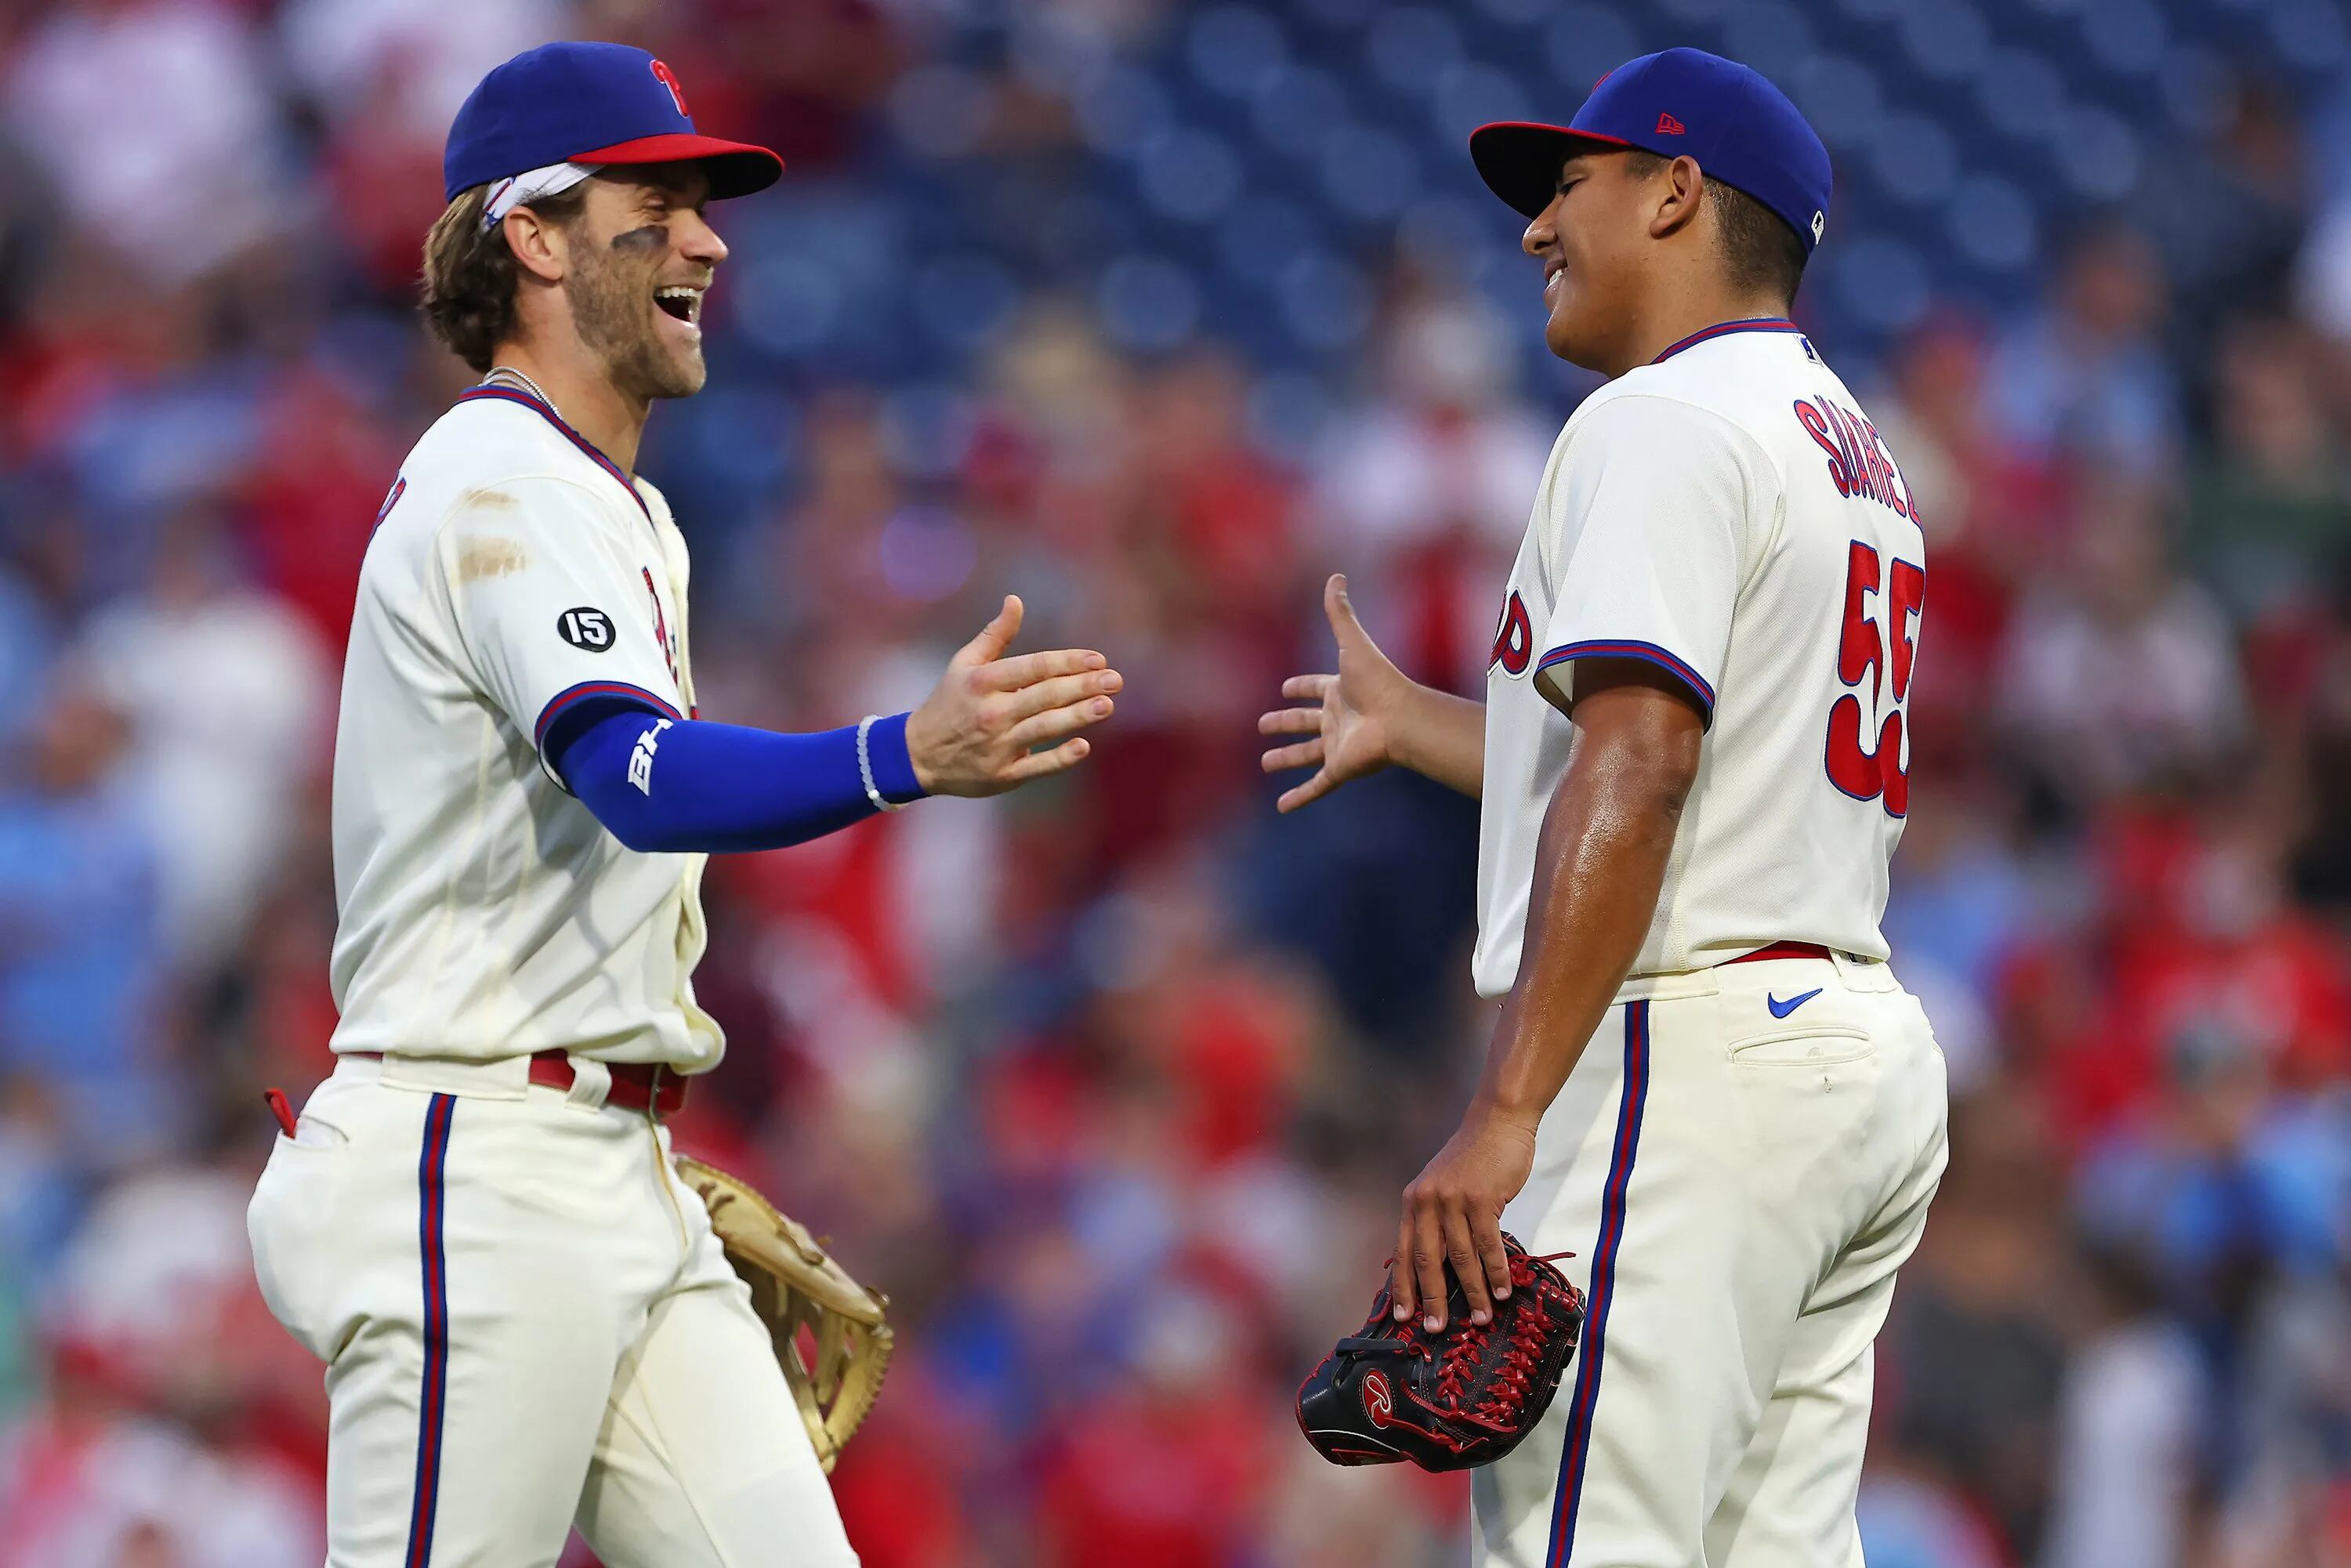 Ranger Suárez outpitches Cy Young candidate as Phillies defeat